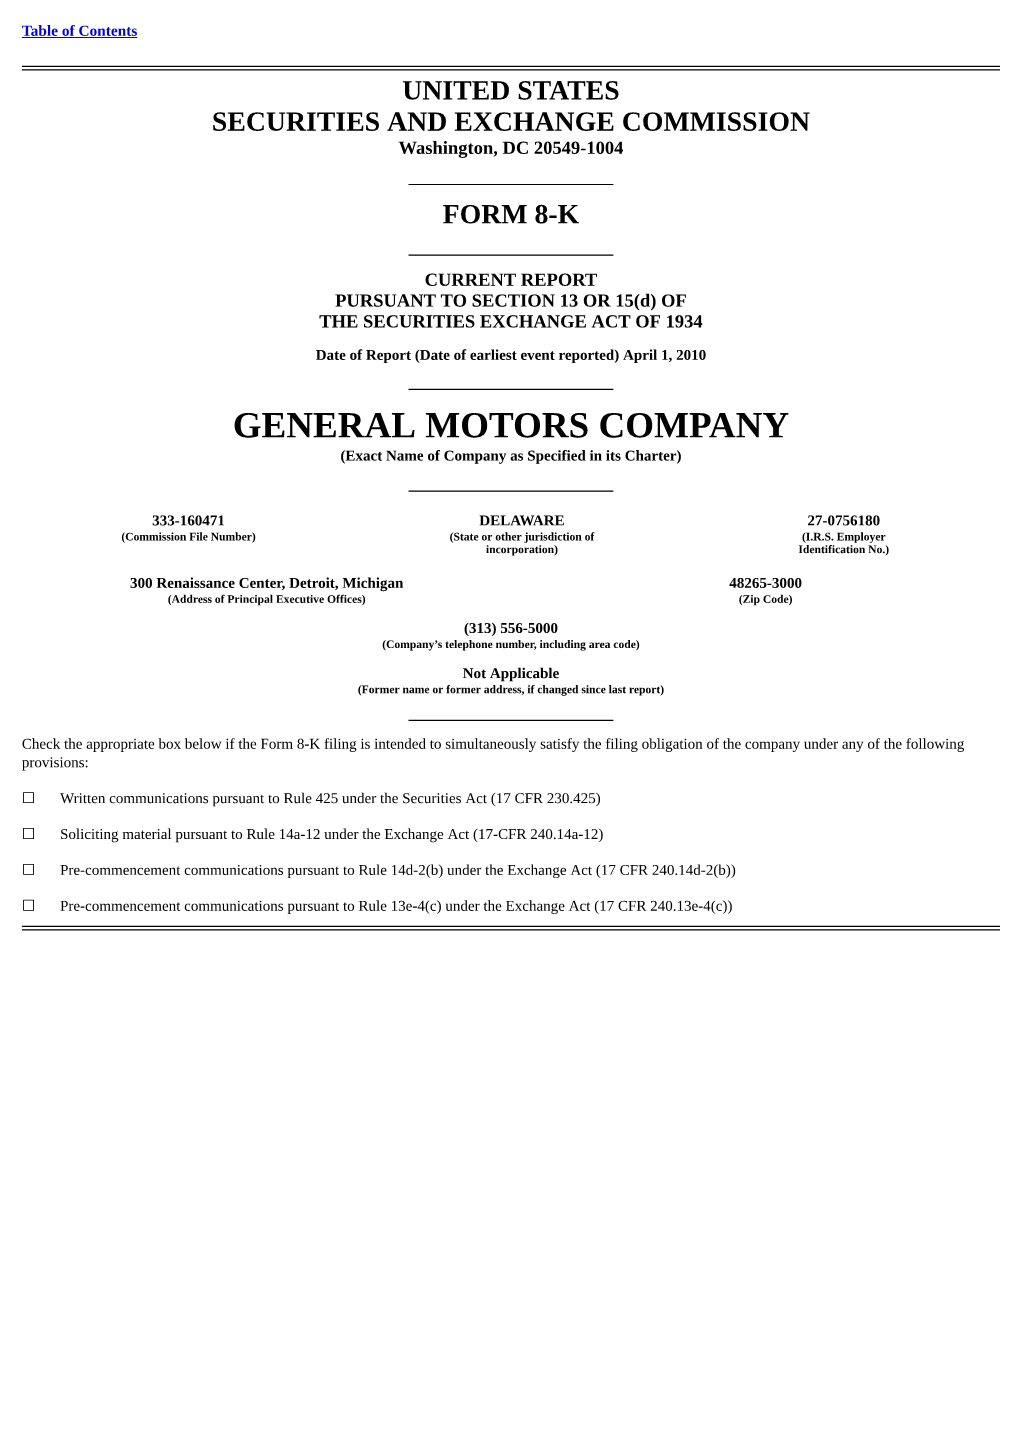 GENERAL MOTORS COMPANY (Exact Name of Company As Specified in Its Charter)